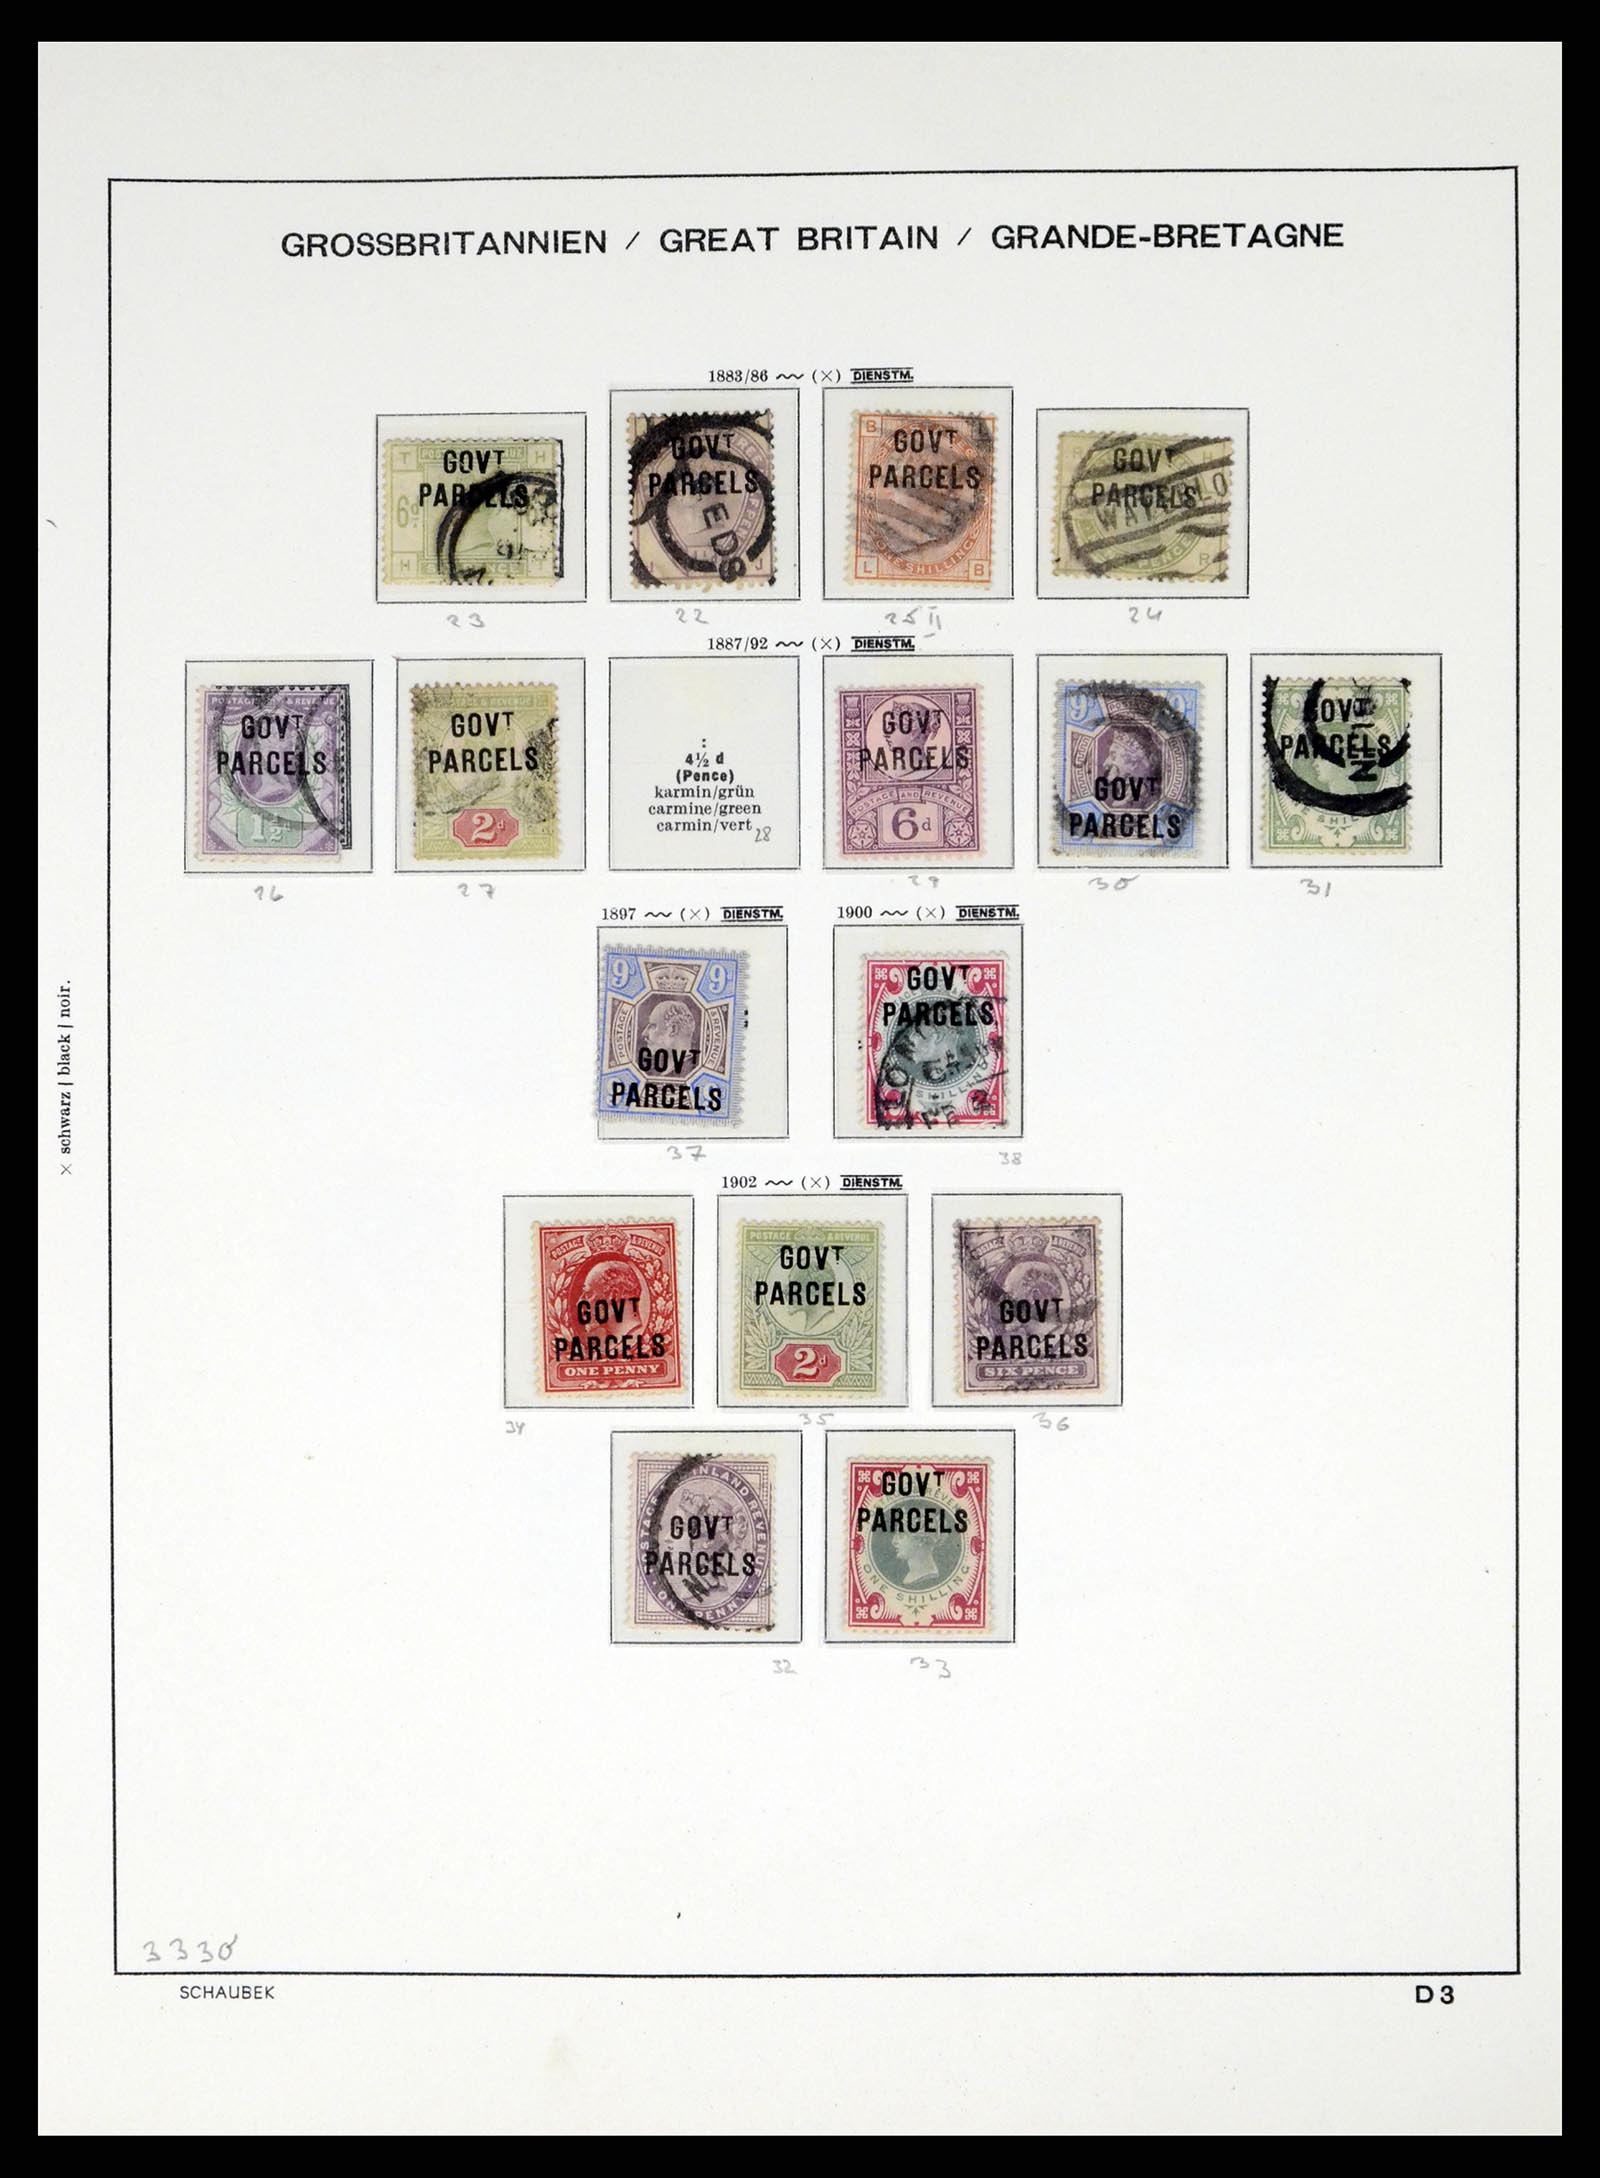 37310 118 - Stamp collection 37310 Great Britain 1840-1988.